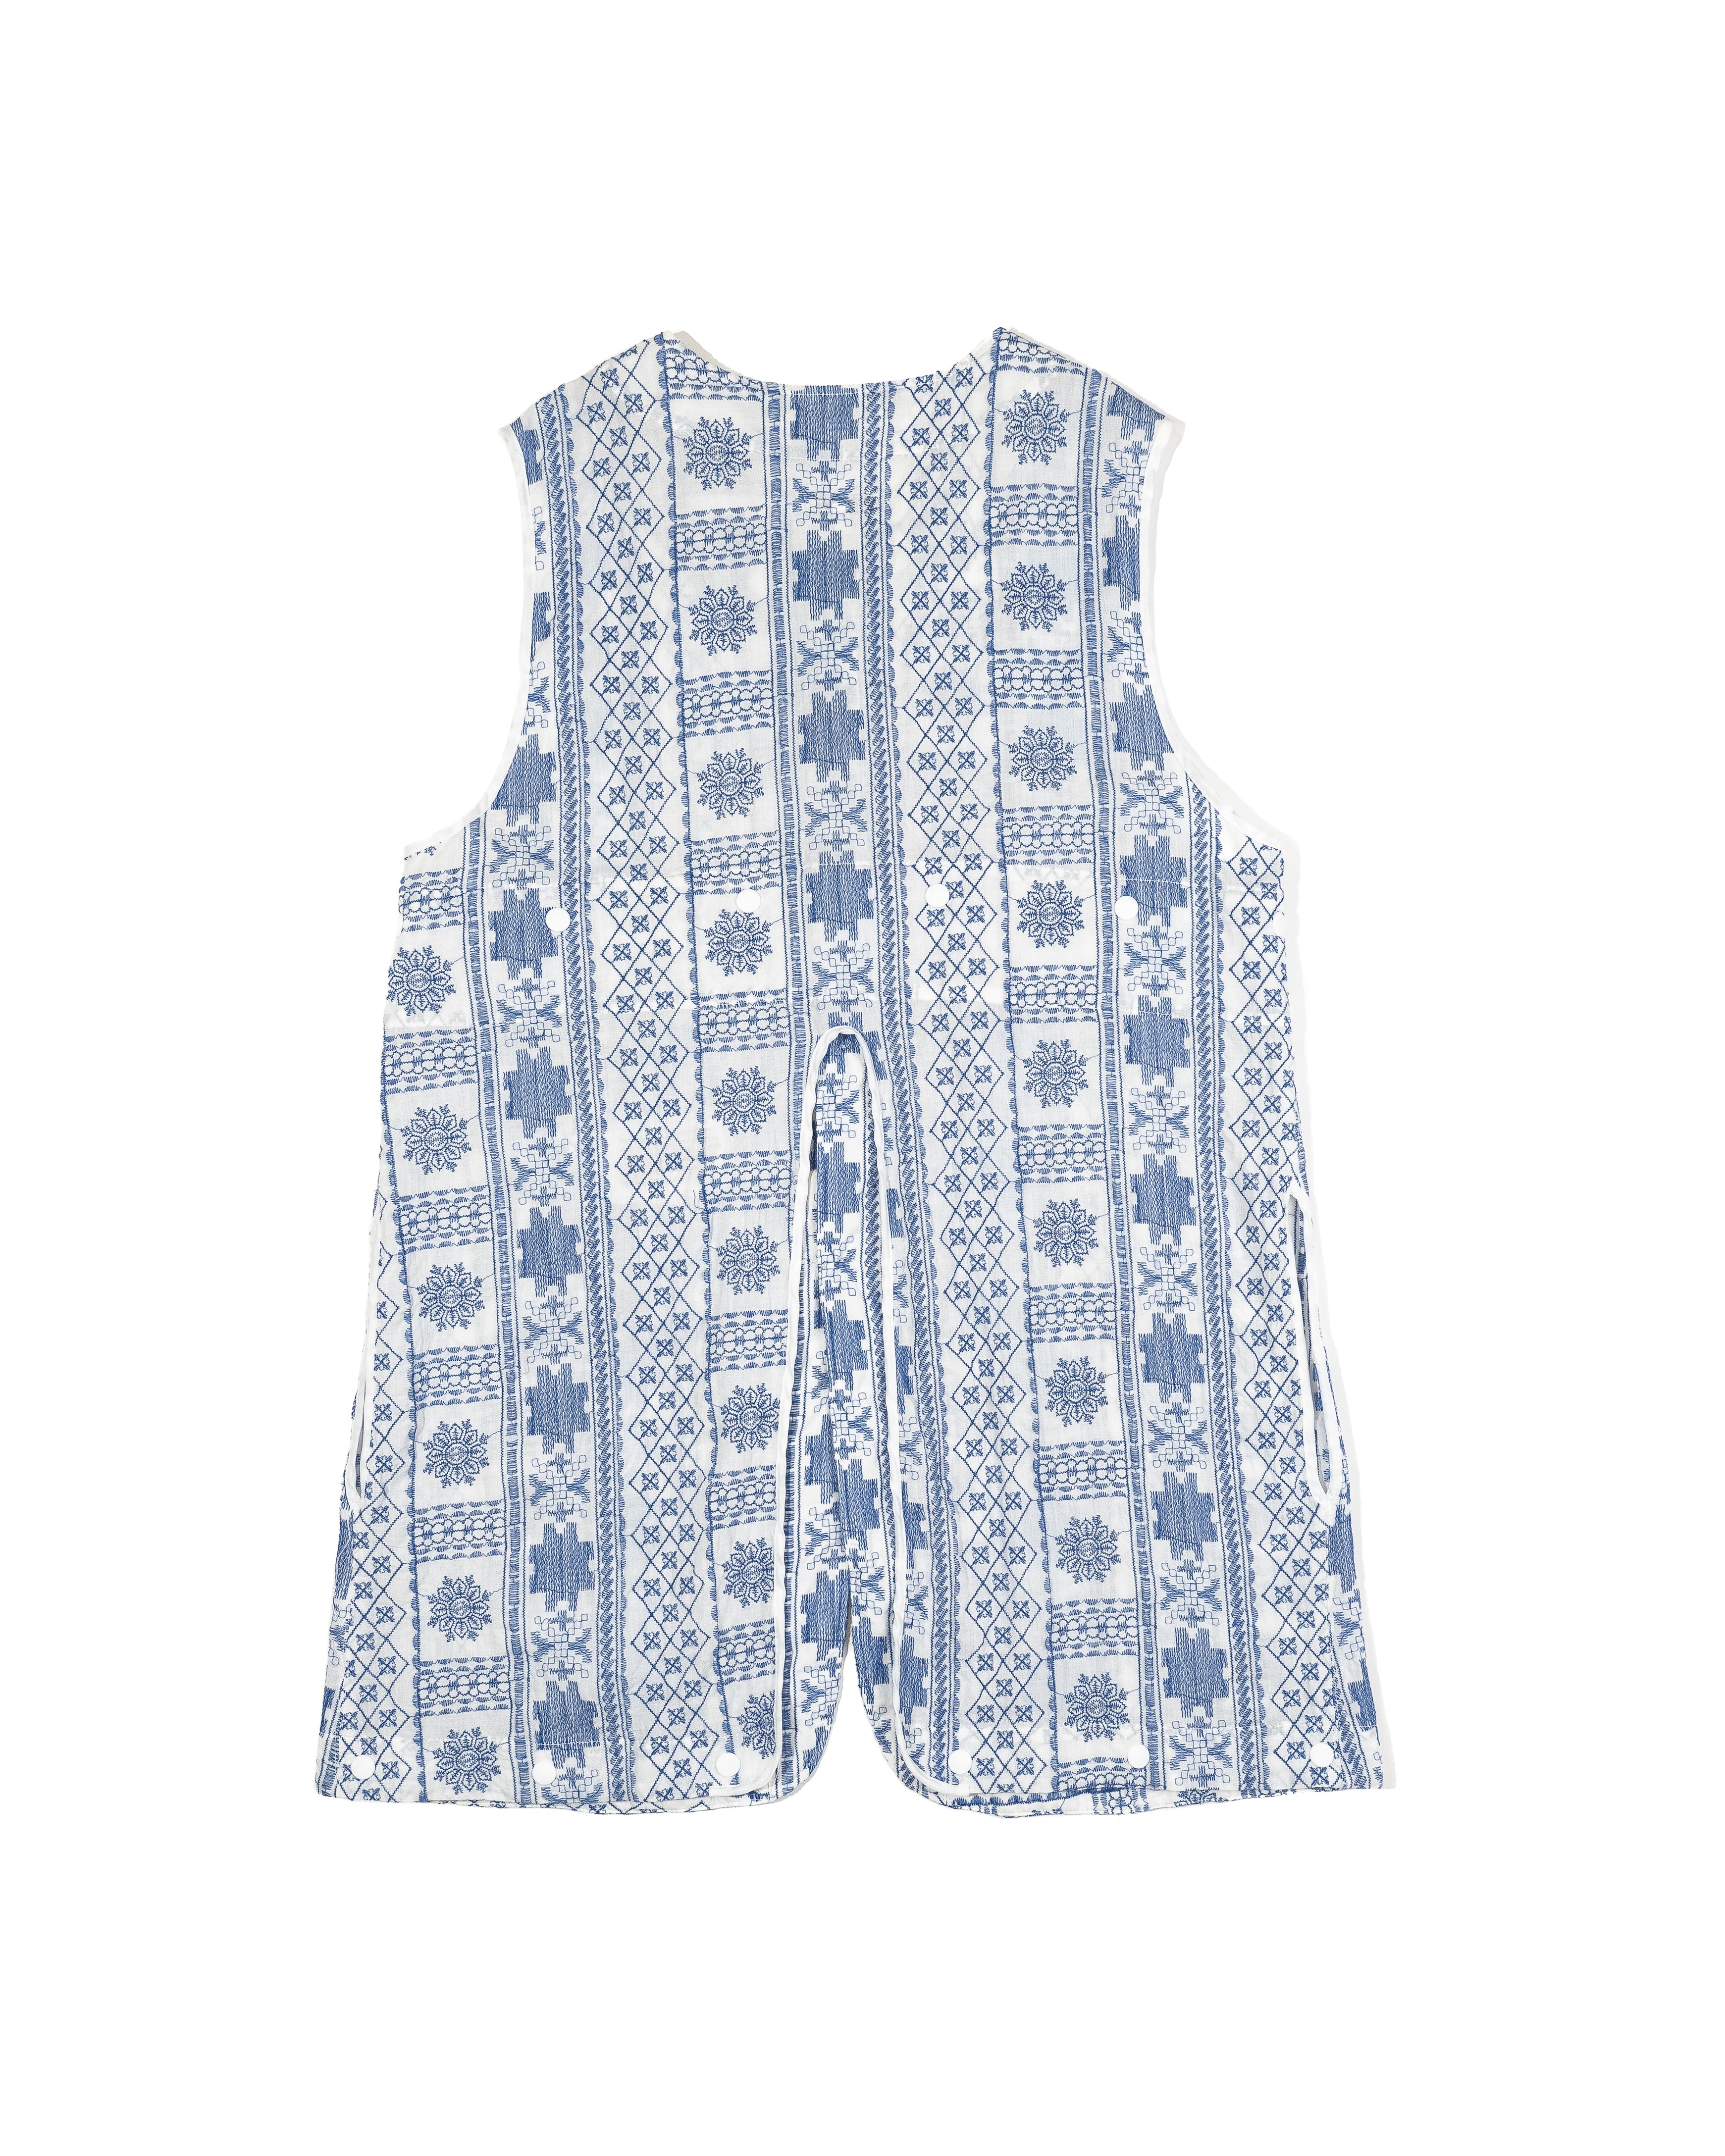 Liner Vest - Blue / White CP Embroidery